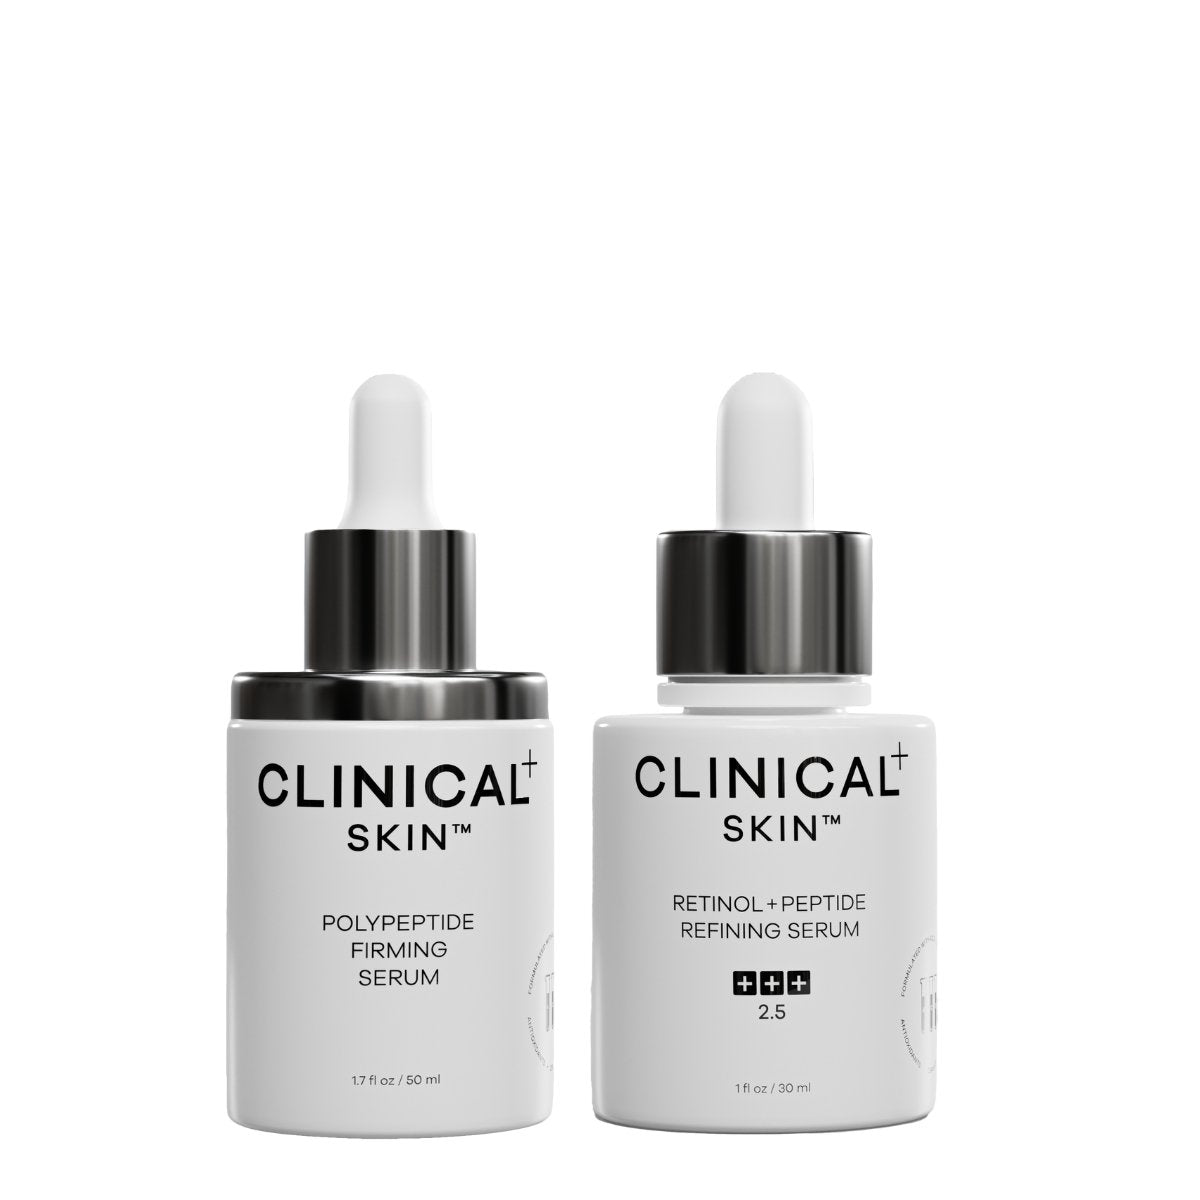 Clinical Skin Advanced Skin Firming and Refining Duo